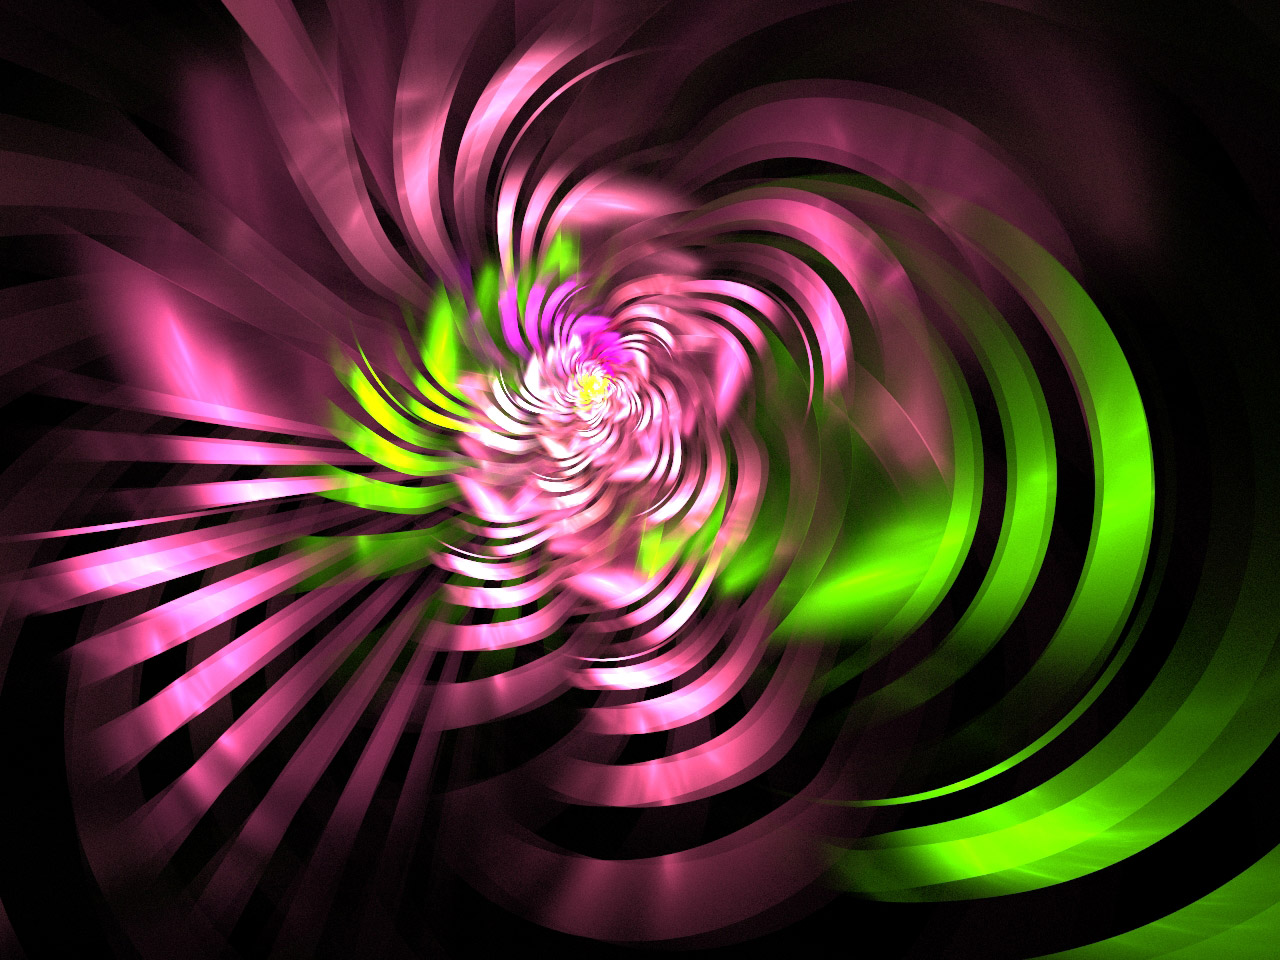 fractal of ribbon-like swirls in pink and green